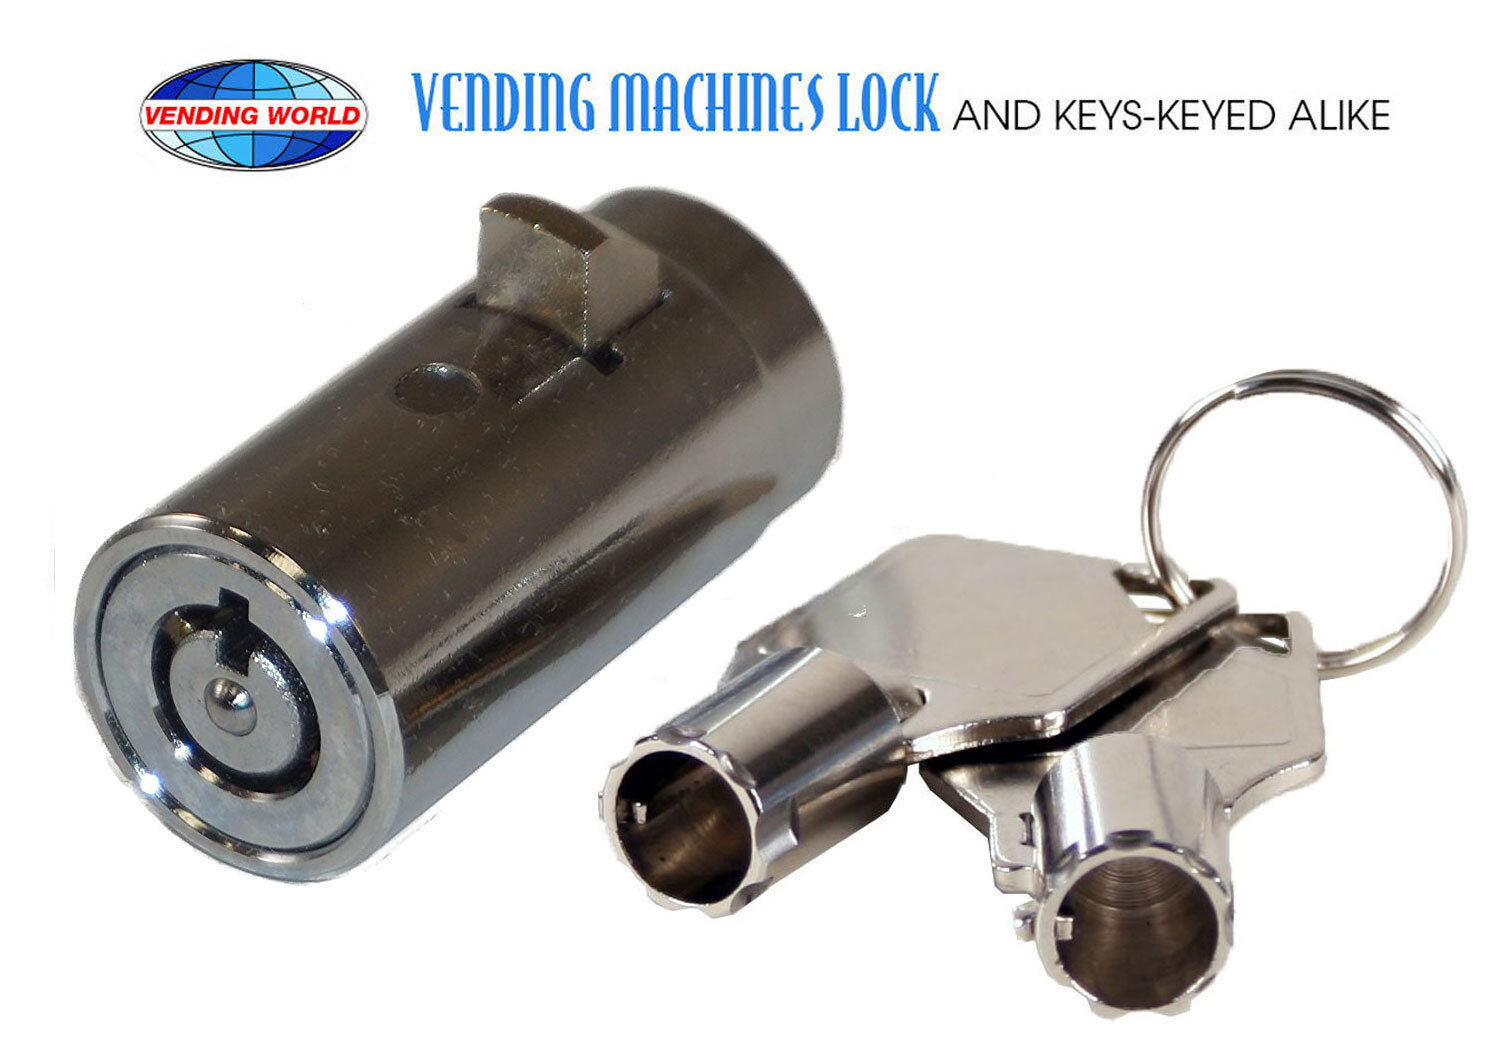 Universal Replacement Plug Lock - #EB01 for Soda / Snack Vending NEW with Keys